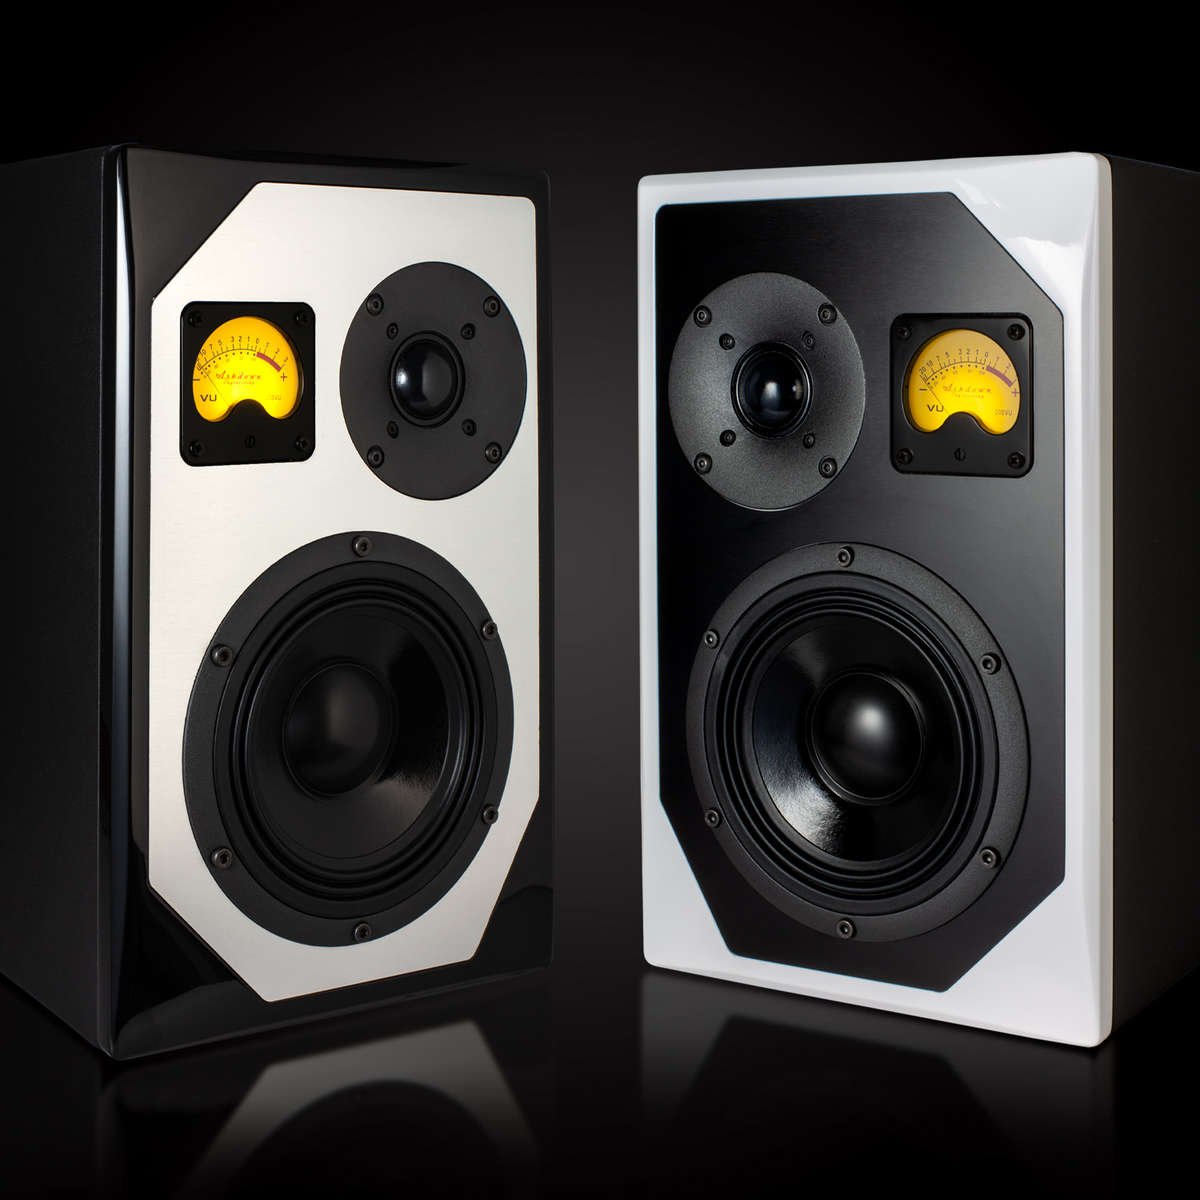 Ashdown nfp 1 pro studio monitor both white and black next to each other